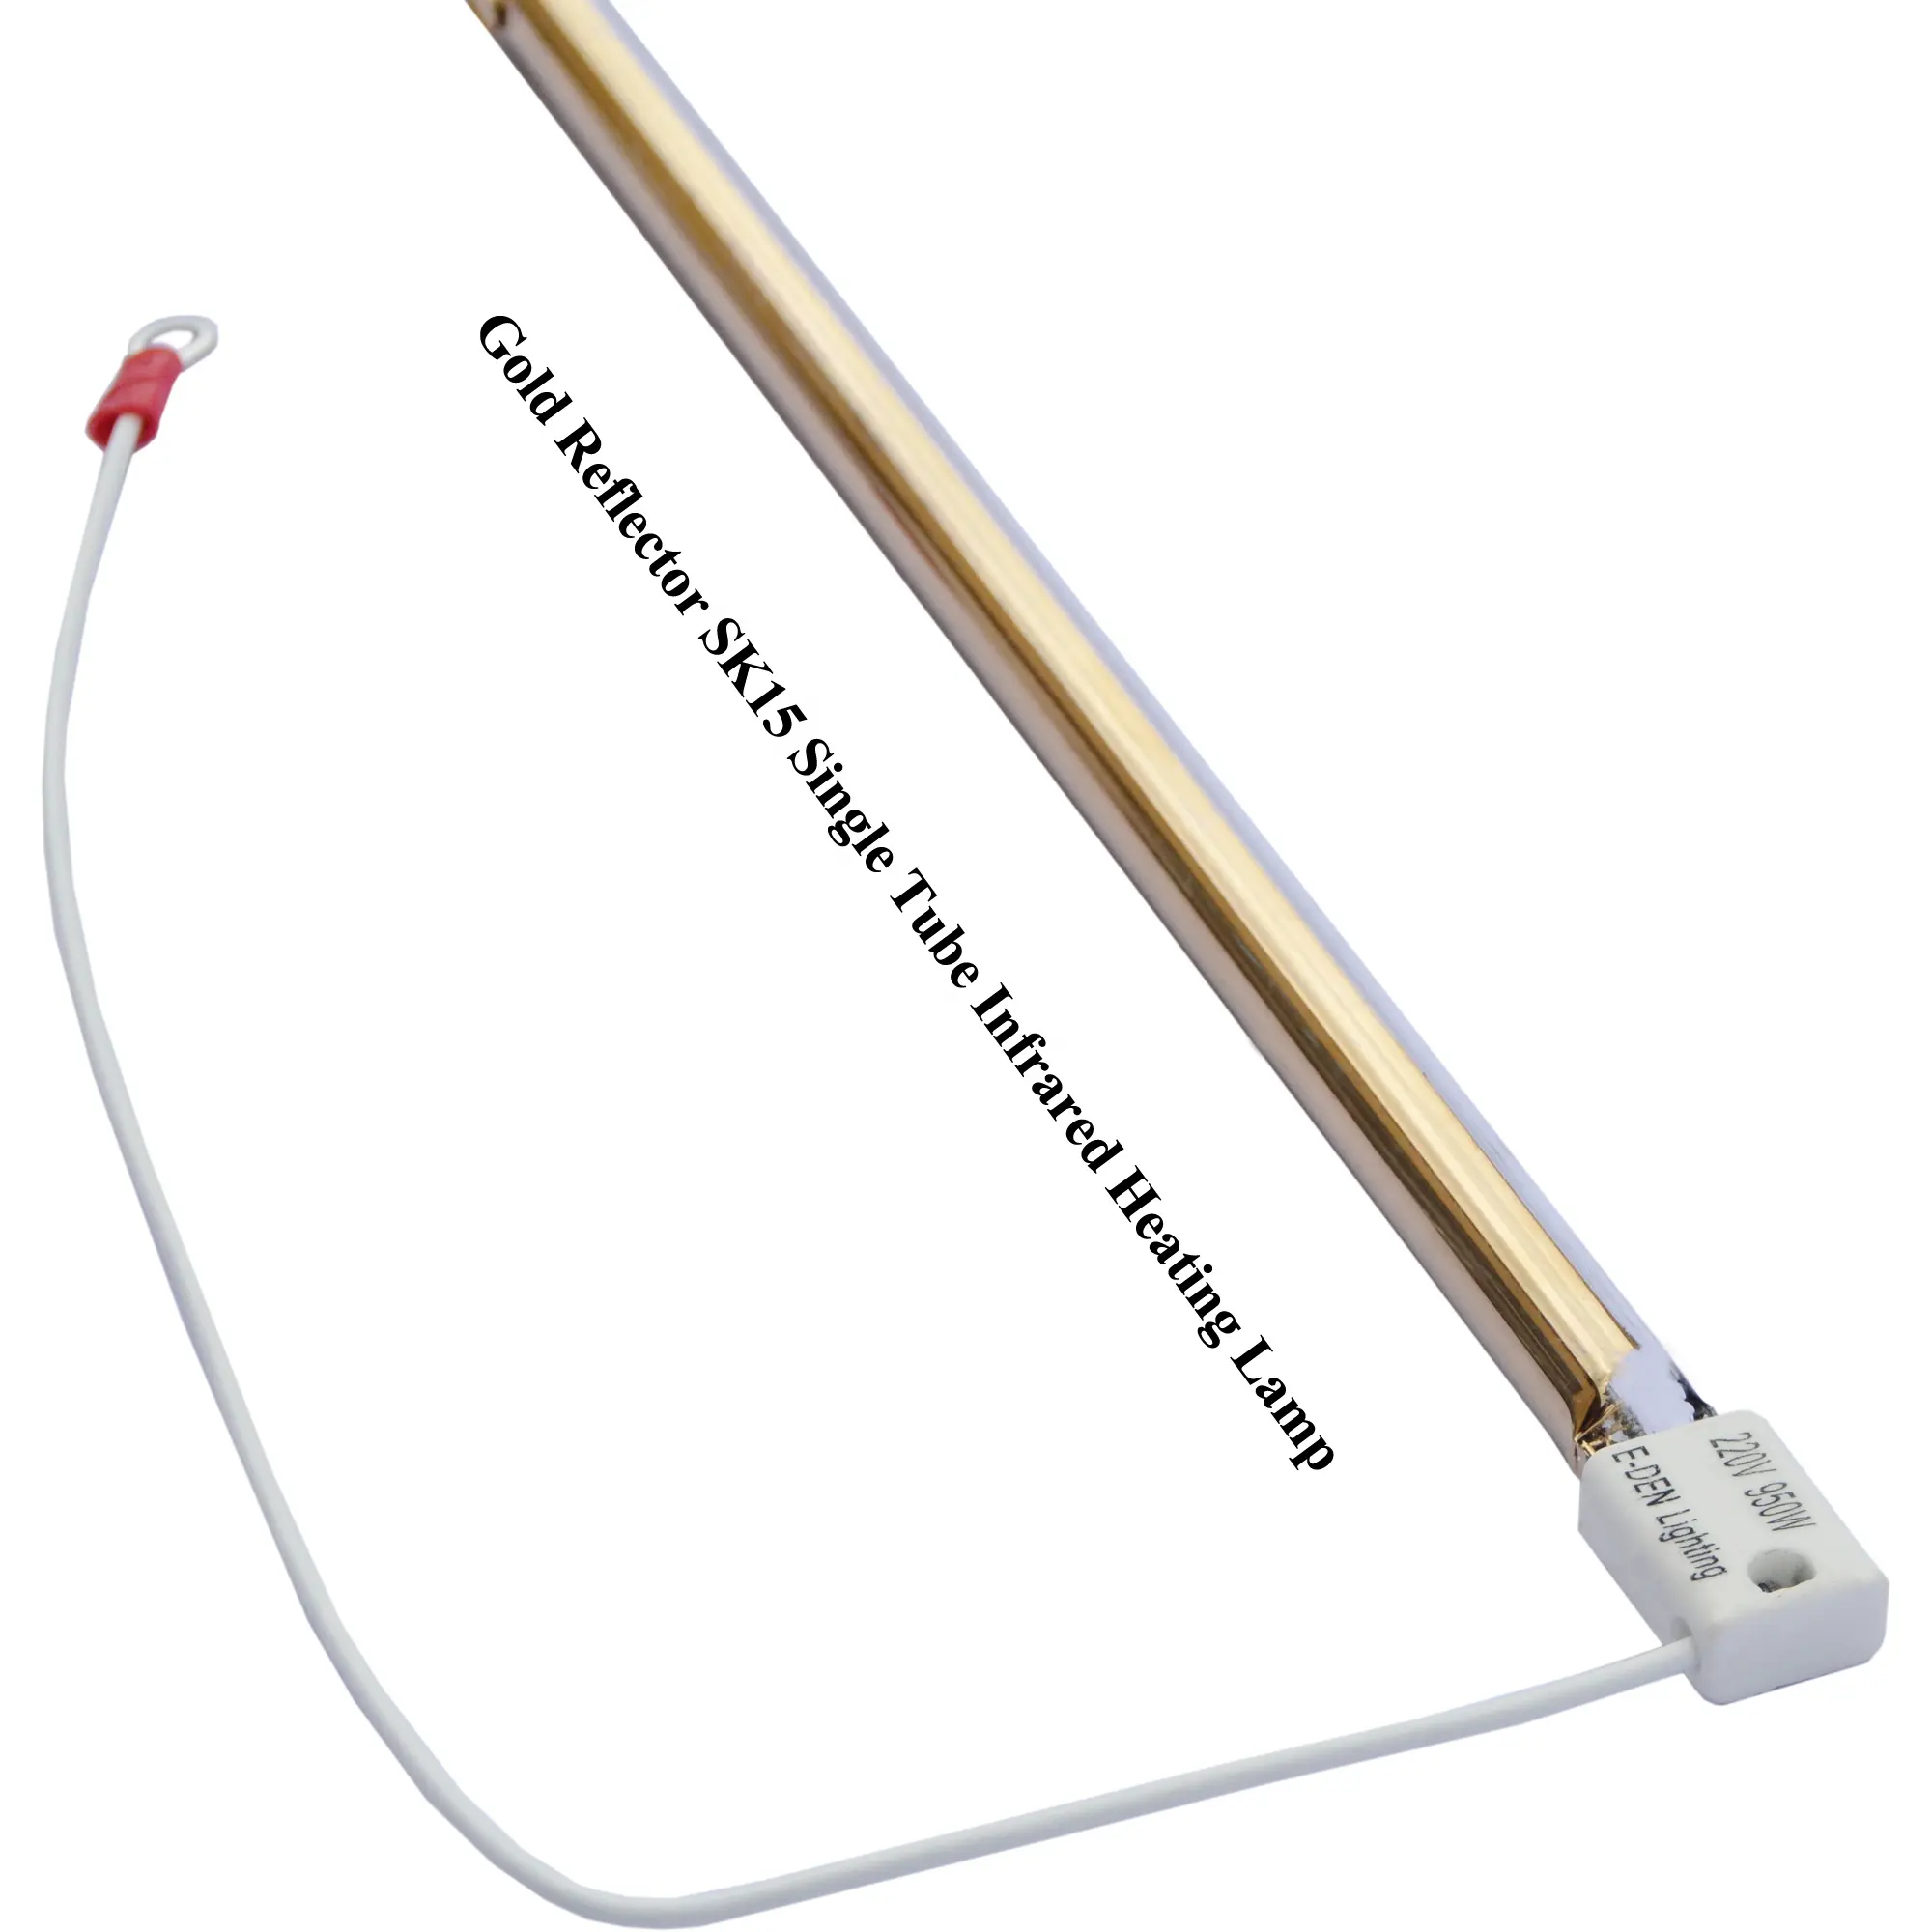 High Efficiency Heating IR Quartz Element Infrared Single Tube Heating Element For Oven Drying